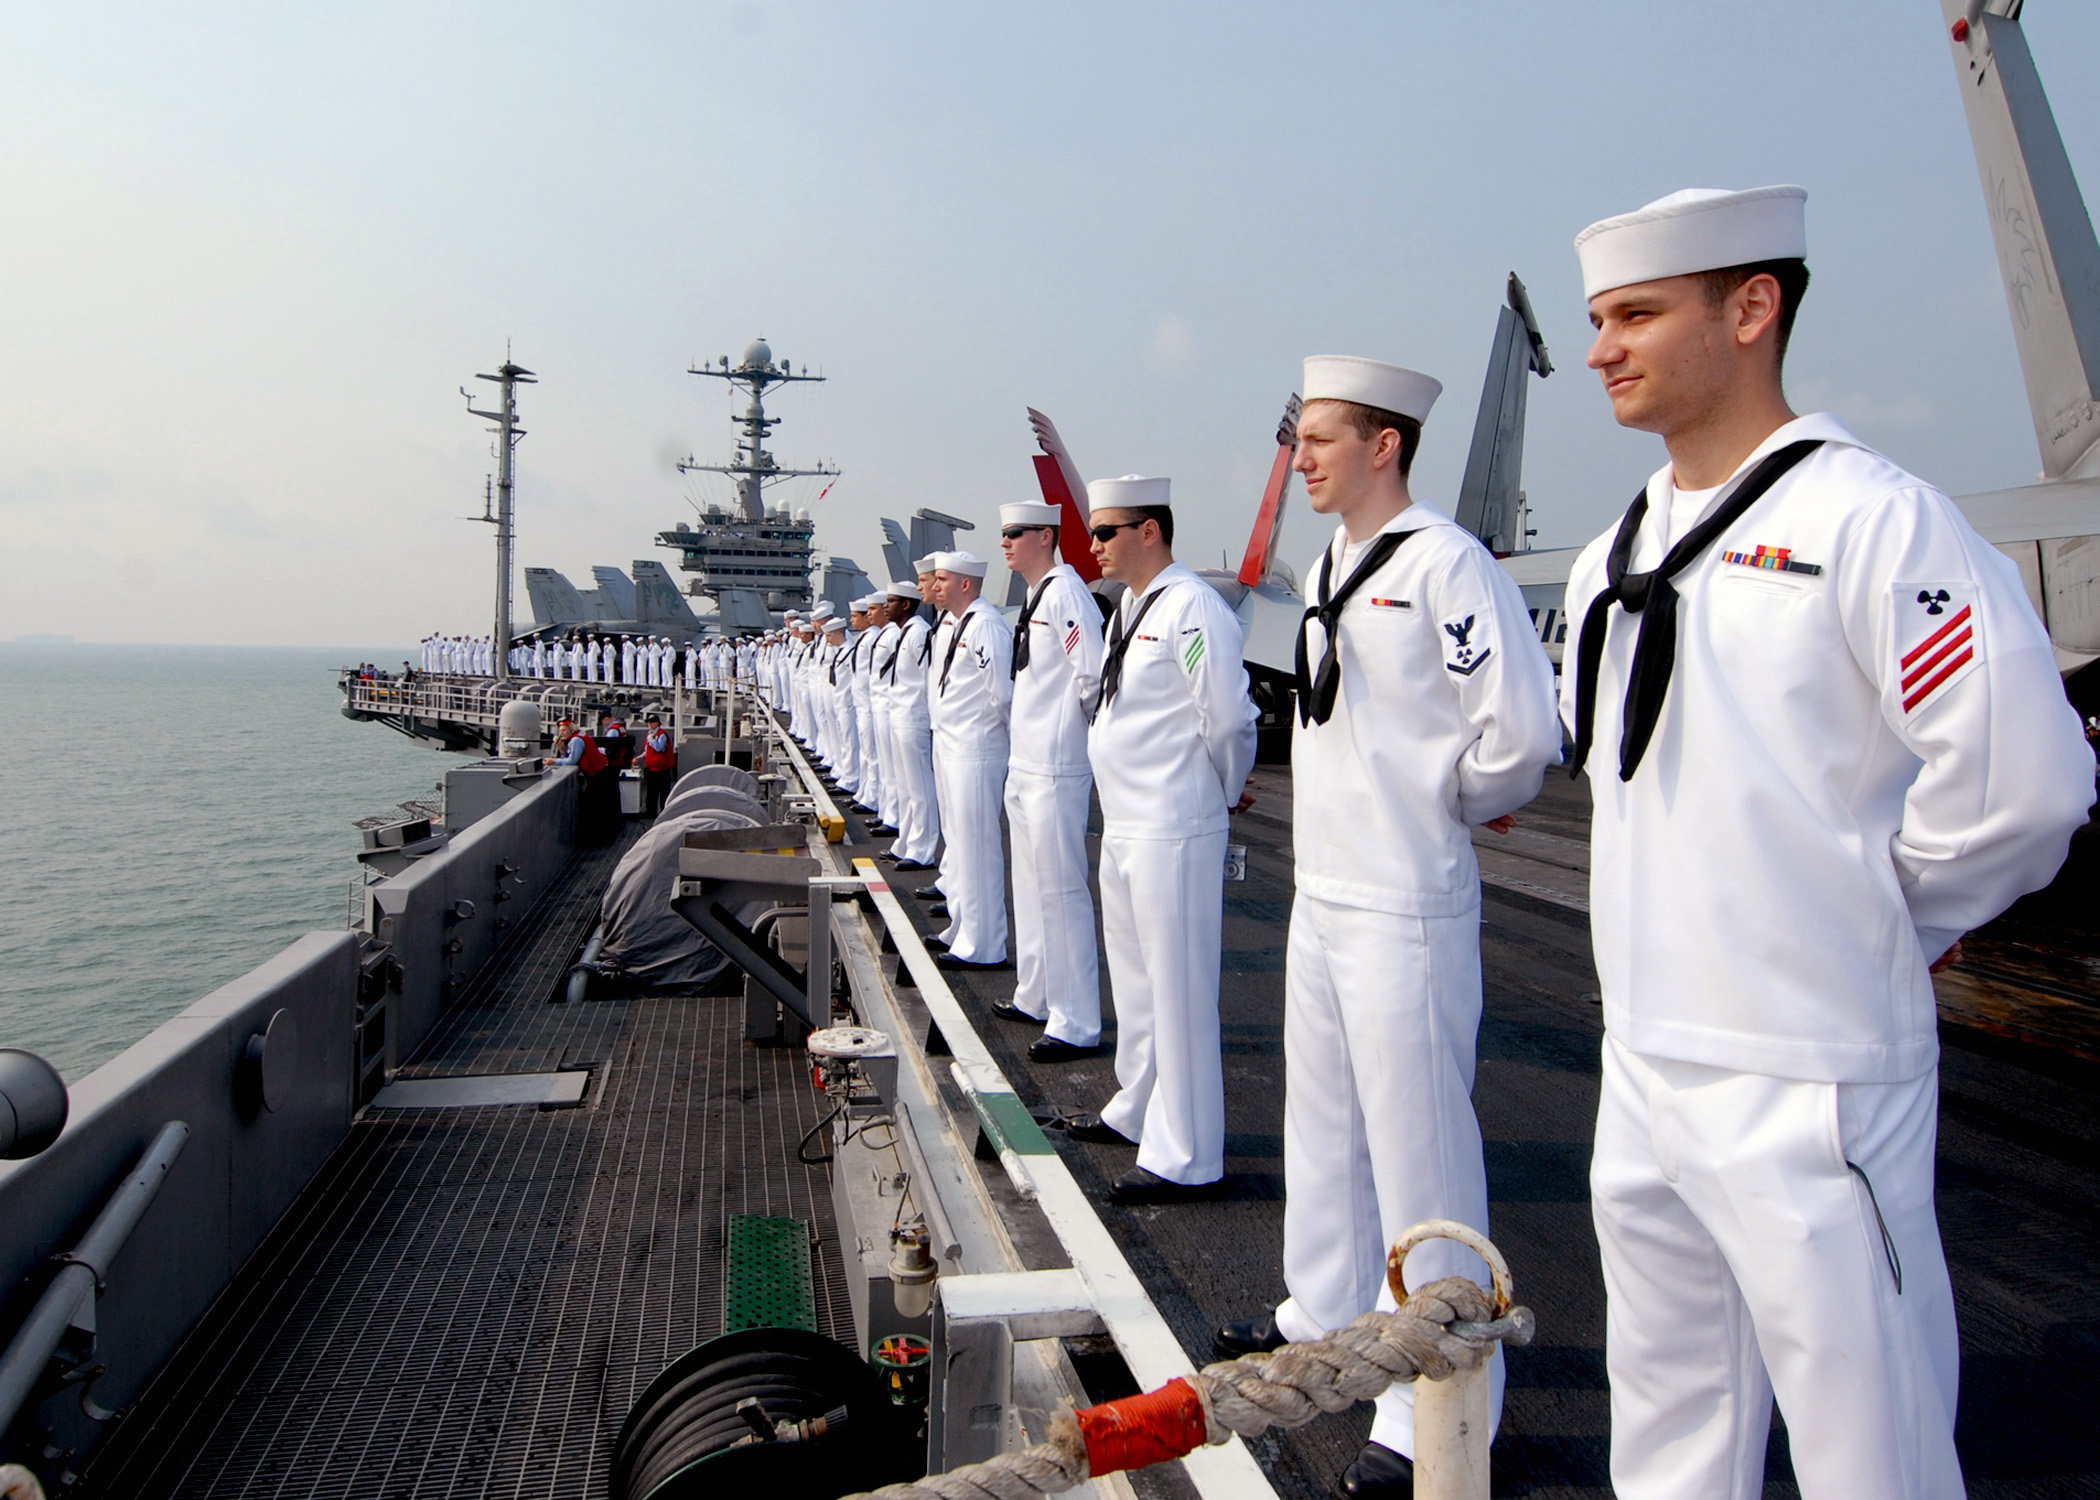 US Navy 090802-N-6720T-045 Sailors man the rails aboard the aircraft carrier USS George Washington (CVN 73) while underway off the coast of Singapore